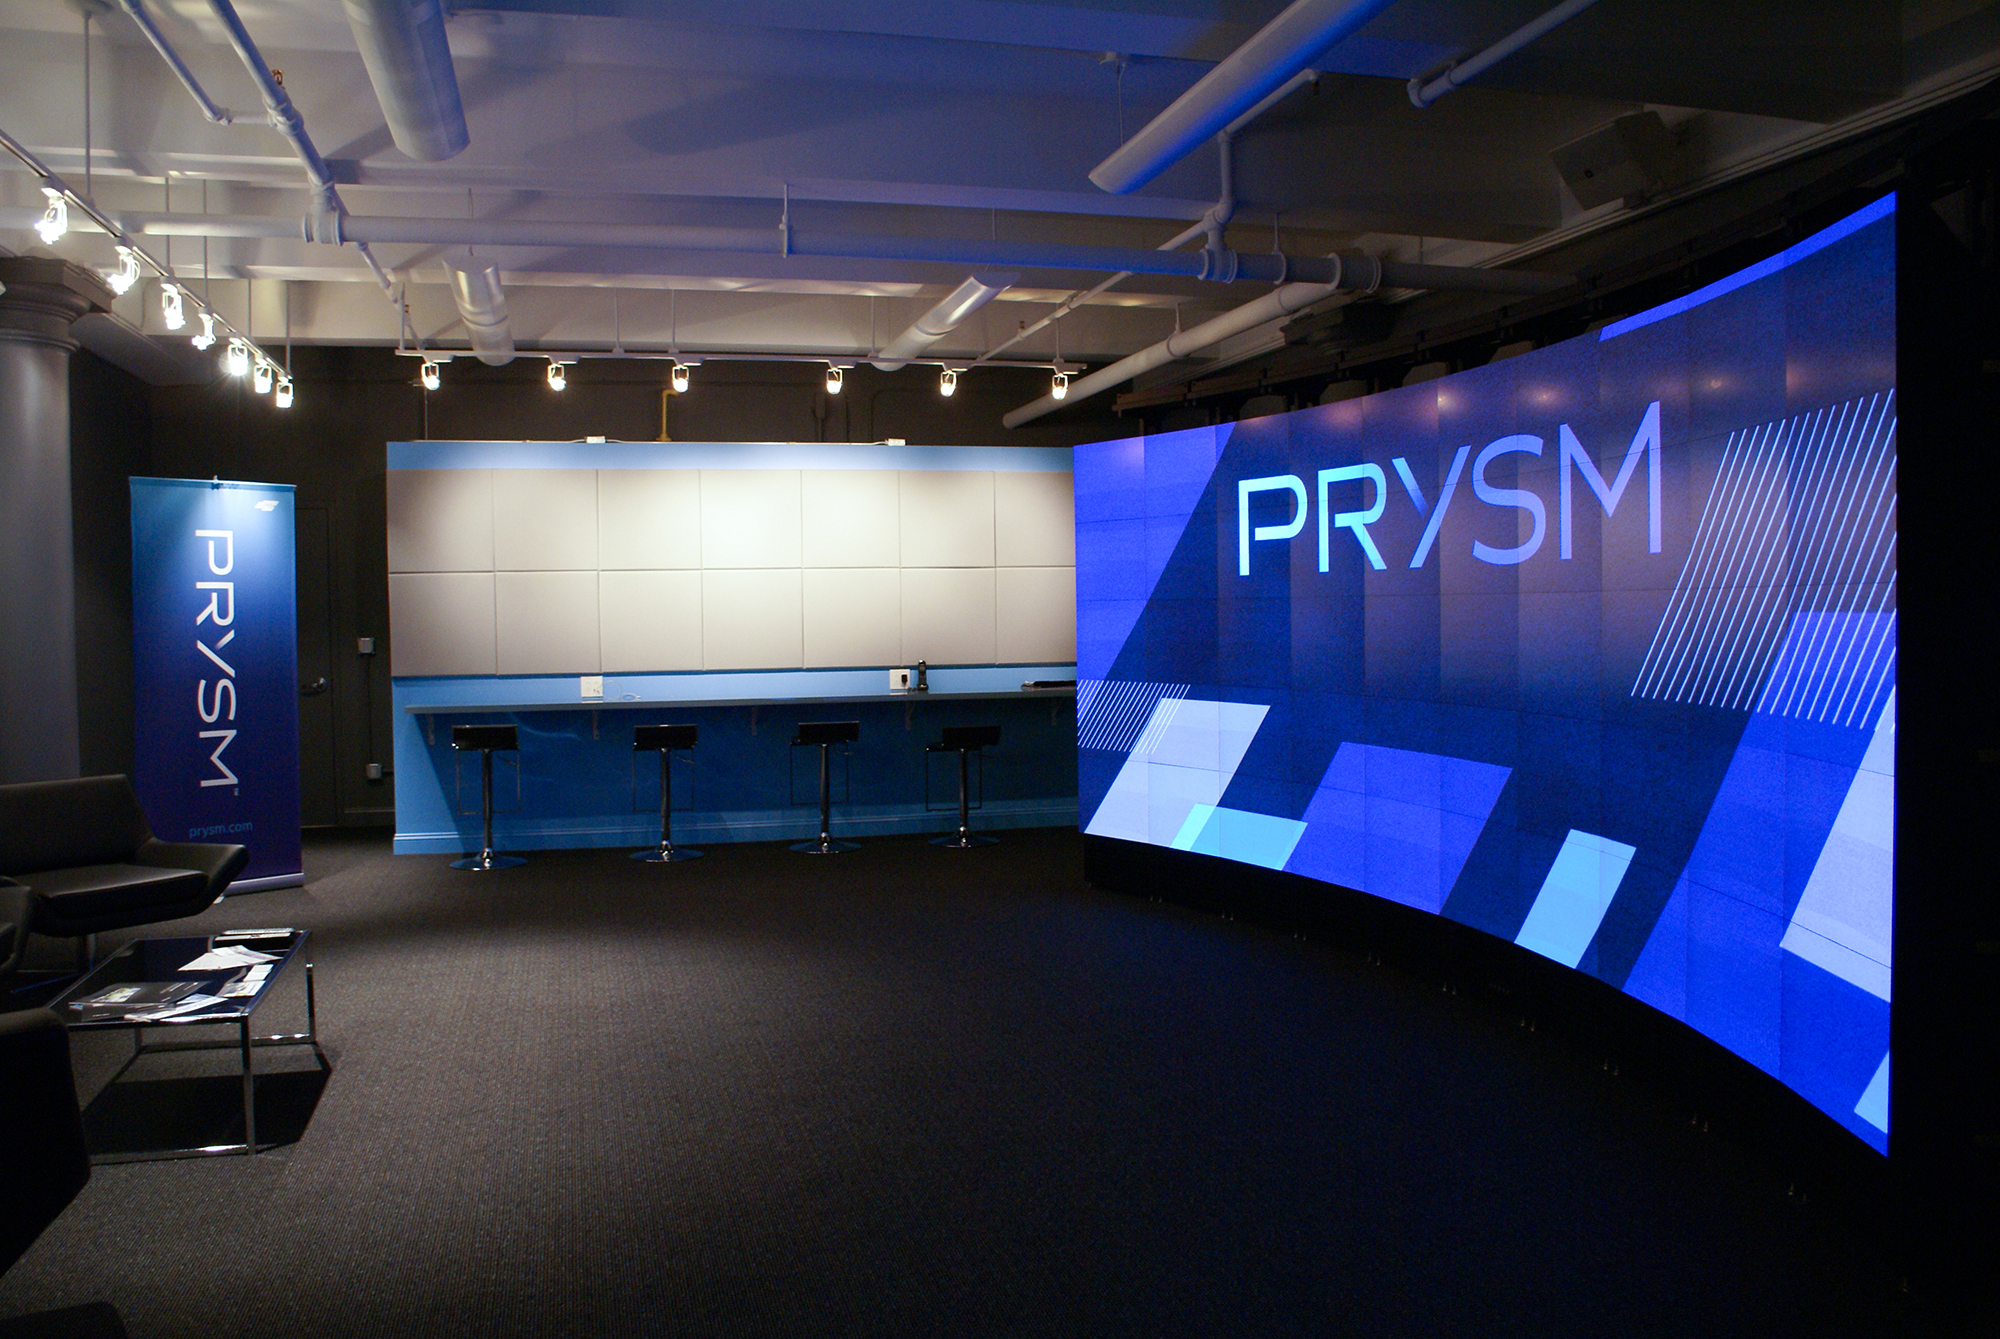 Showroom with wall sized siaply featuring prysm logo and spotlights against back wall